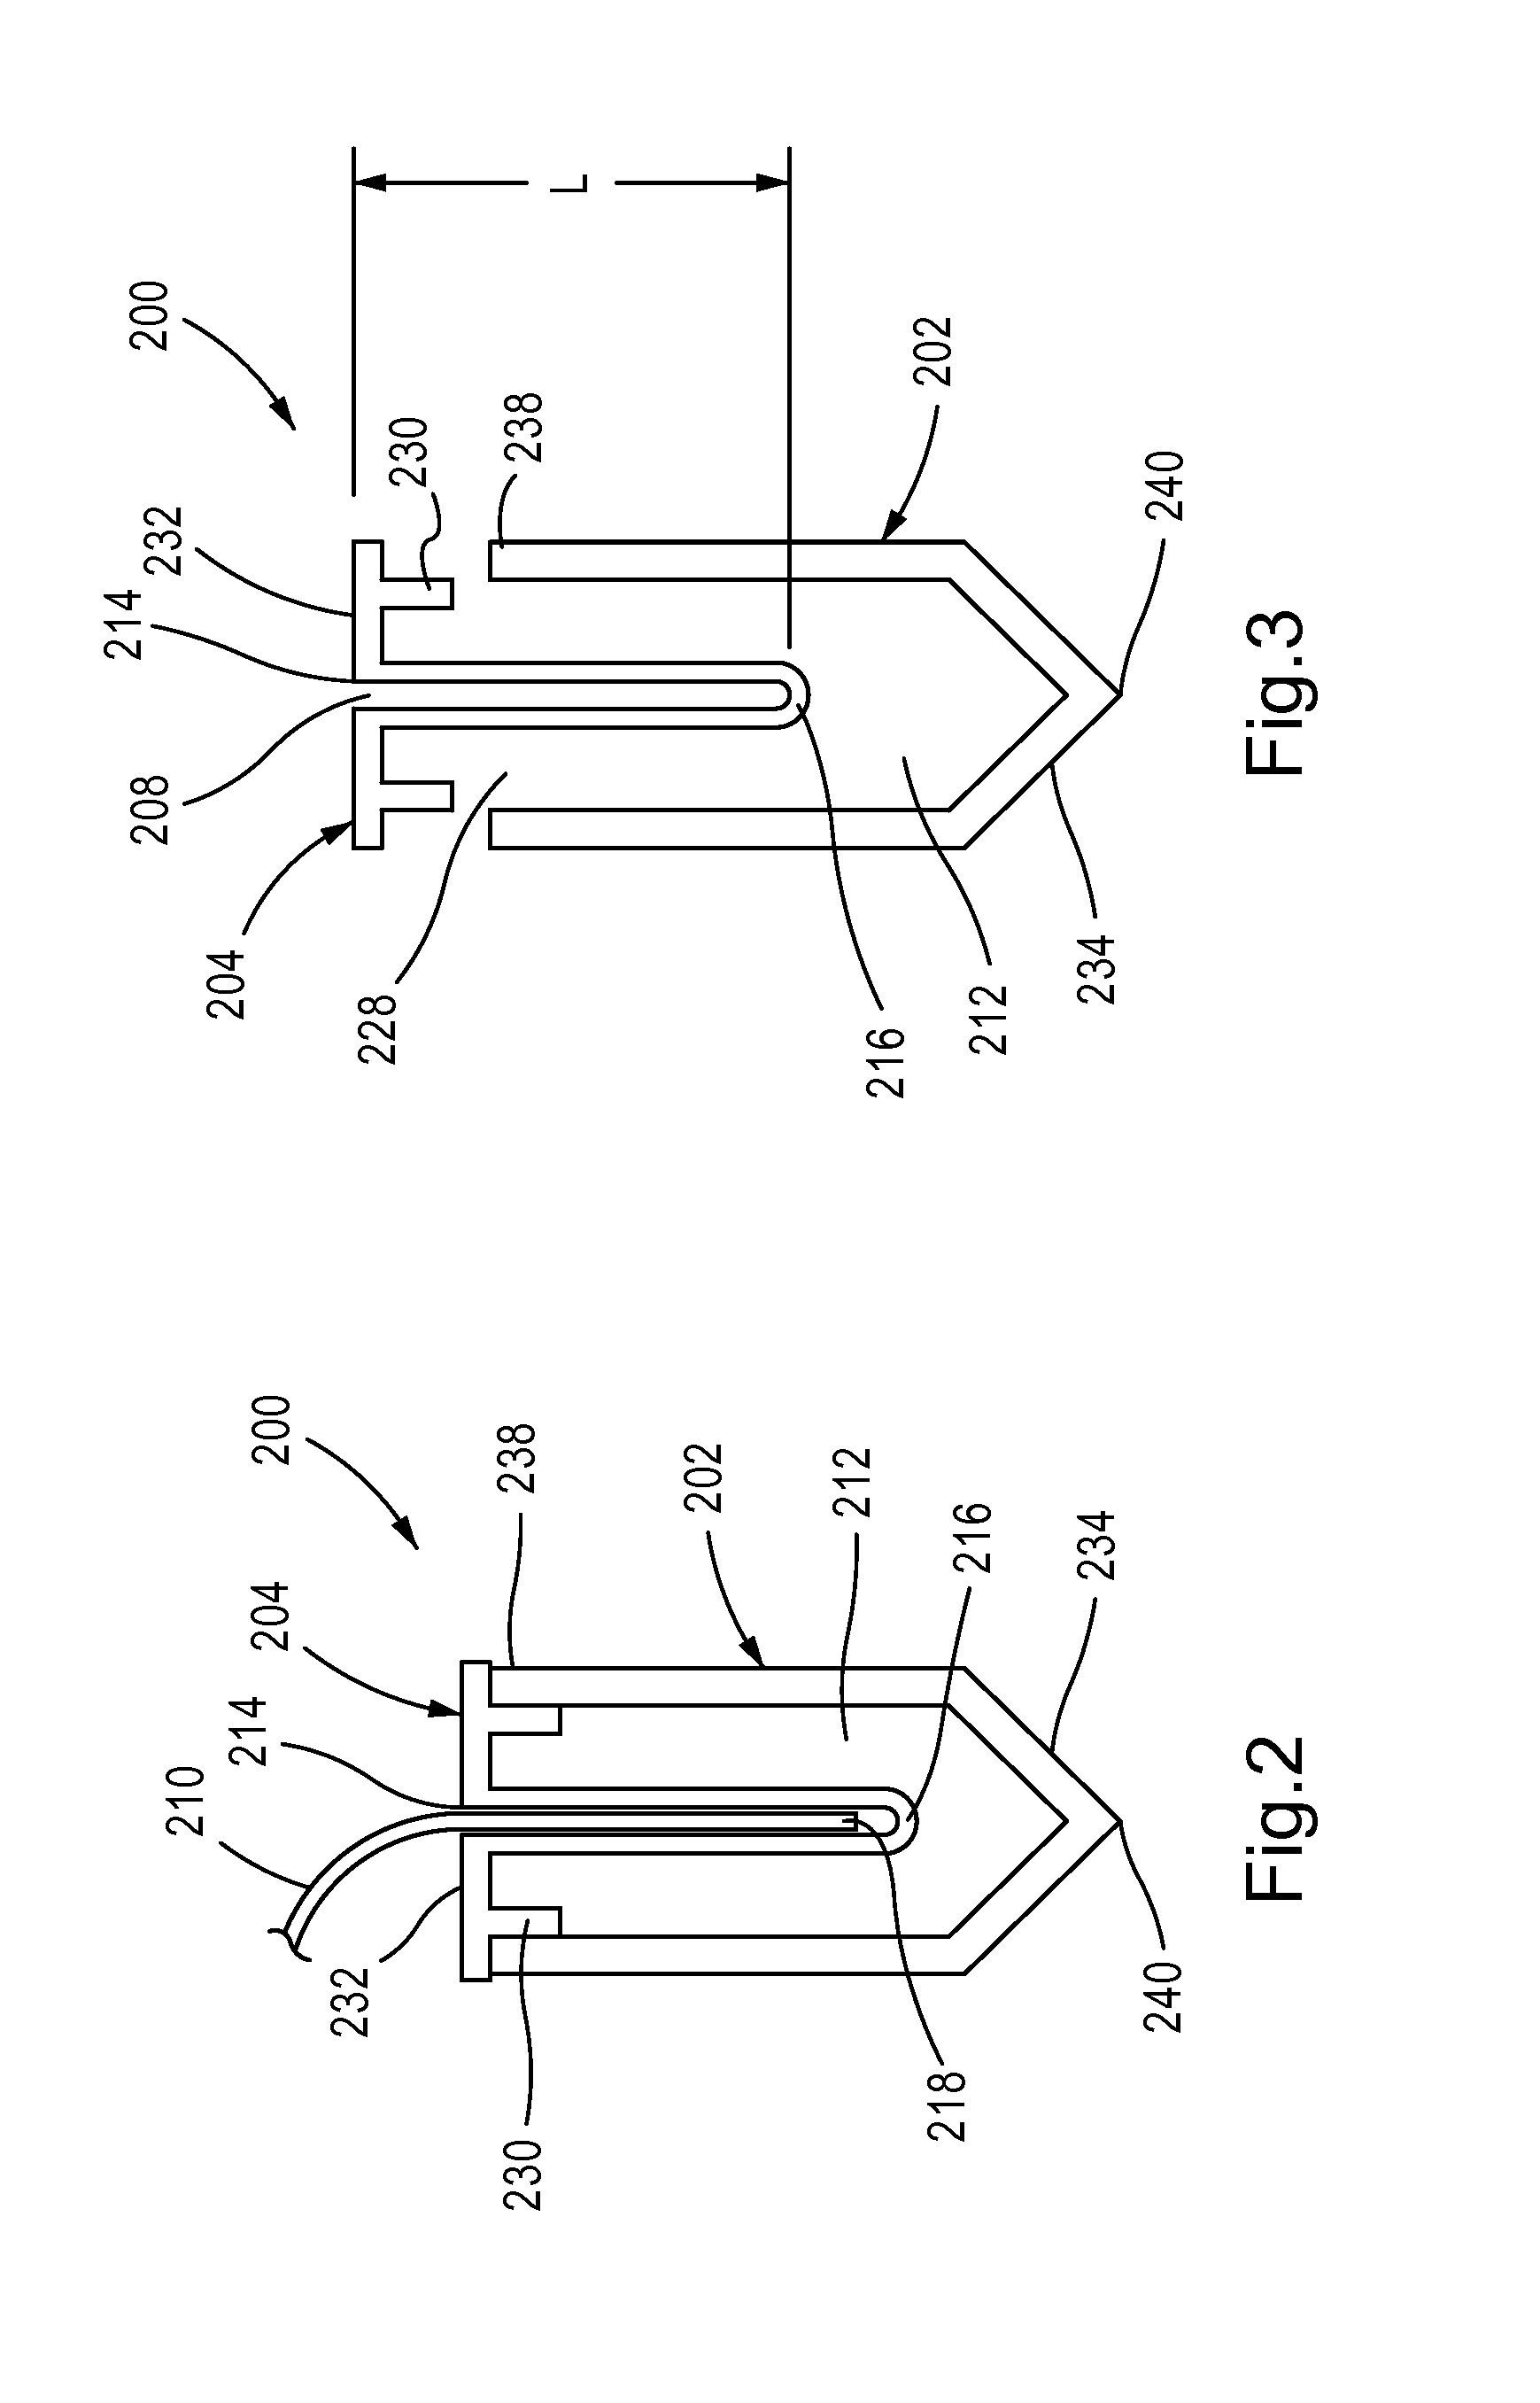 Sample container with sensor receptacle and methods of use